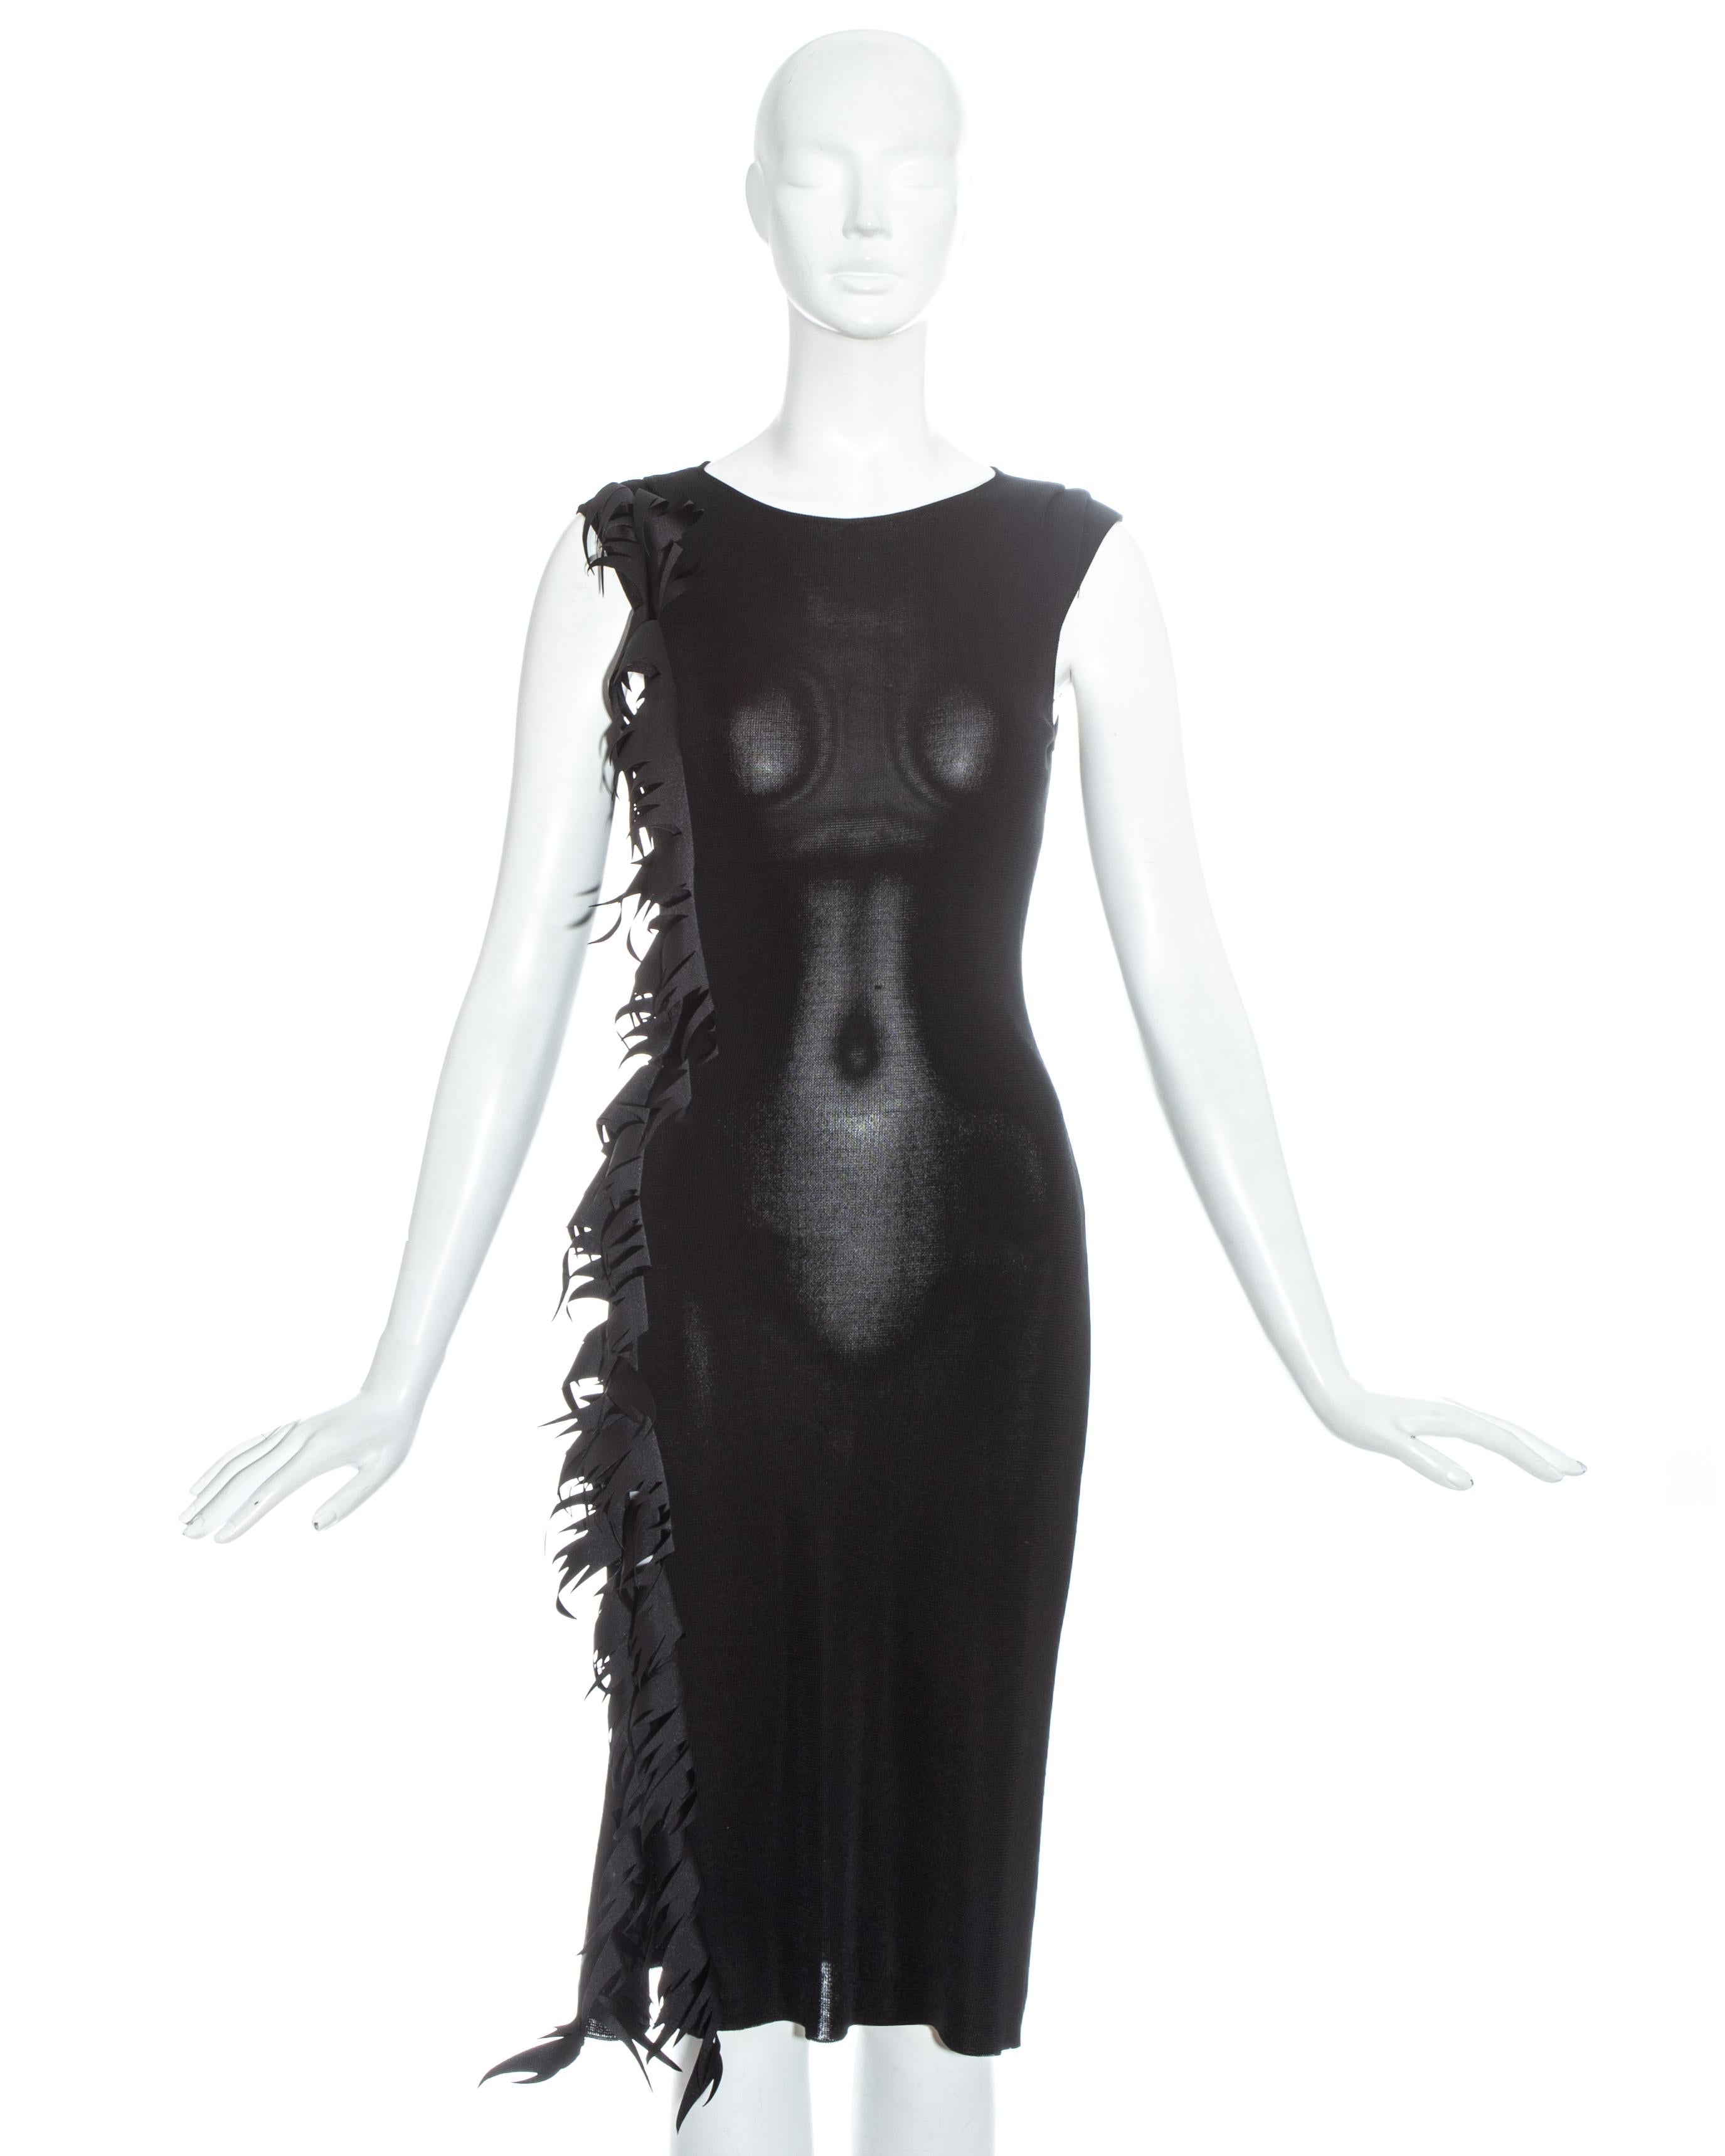 Thierry Mugler black rayon knit mid-length dress with fabric inset in the shape of flames on the right hand side

c. 1990